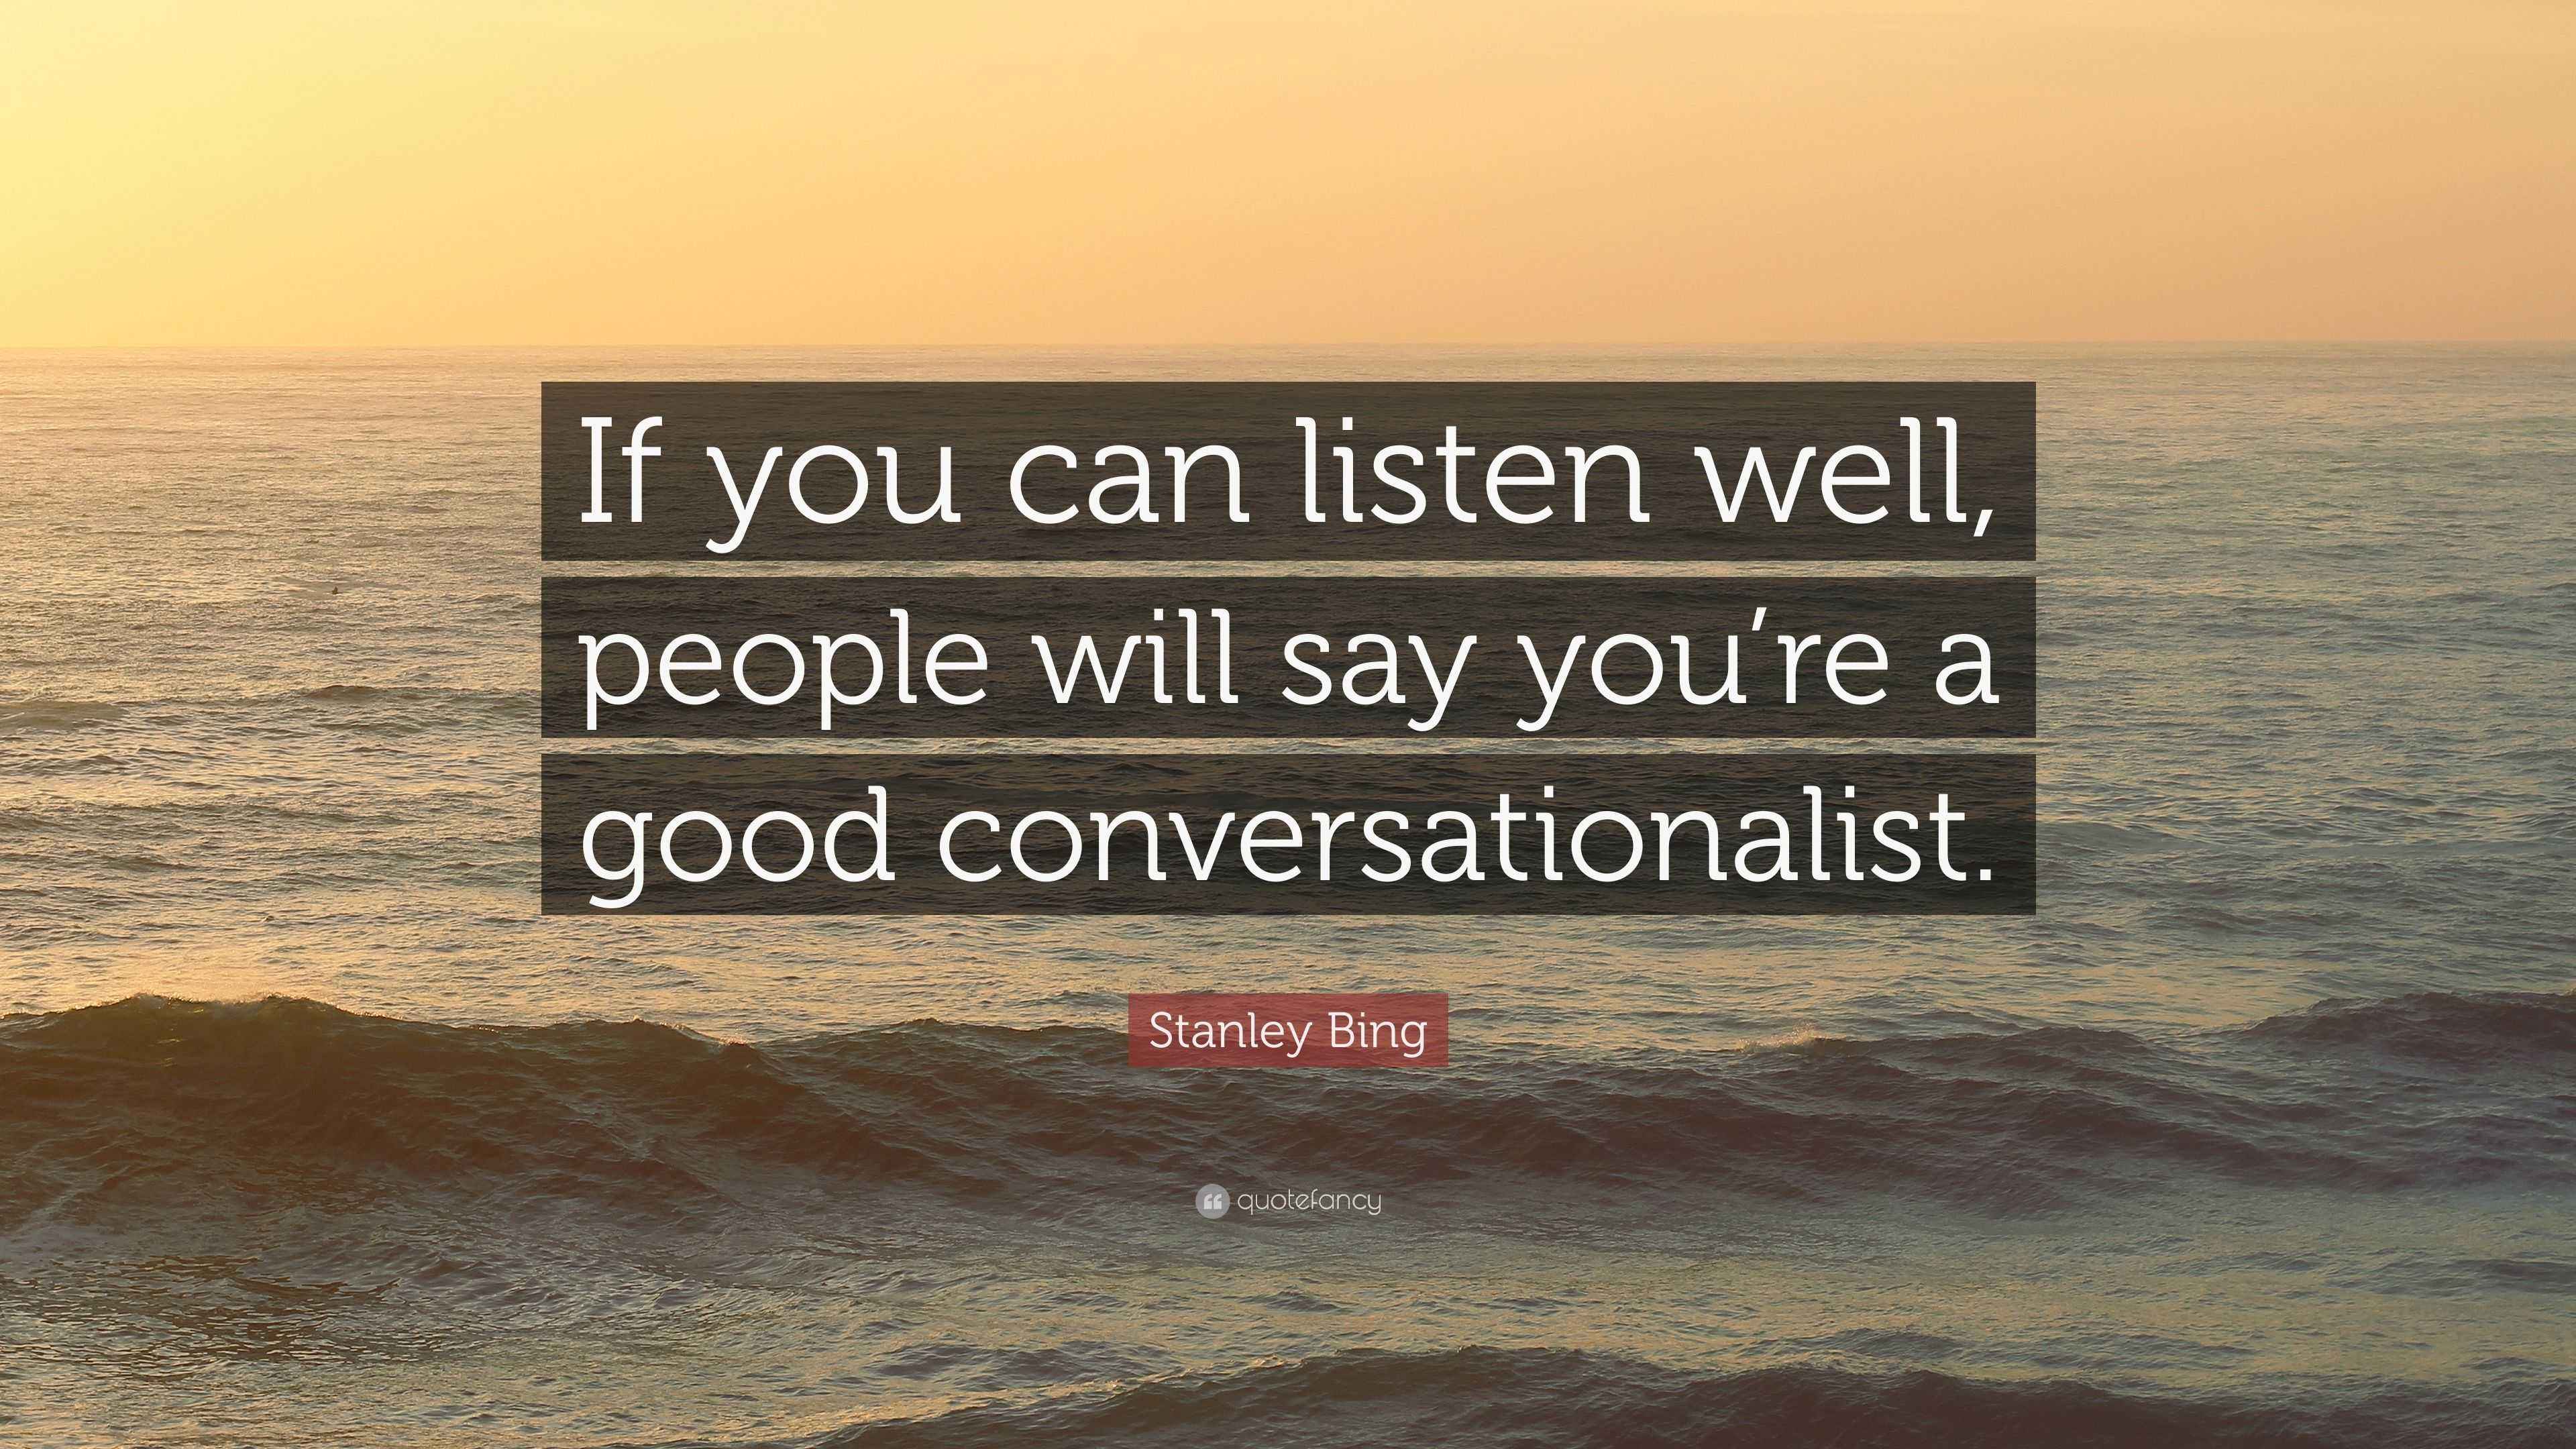 Stanley Bing Quote: “If you can listen well, people will say you’re a ...